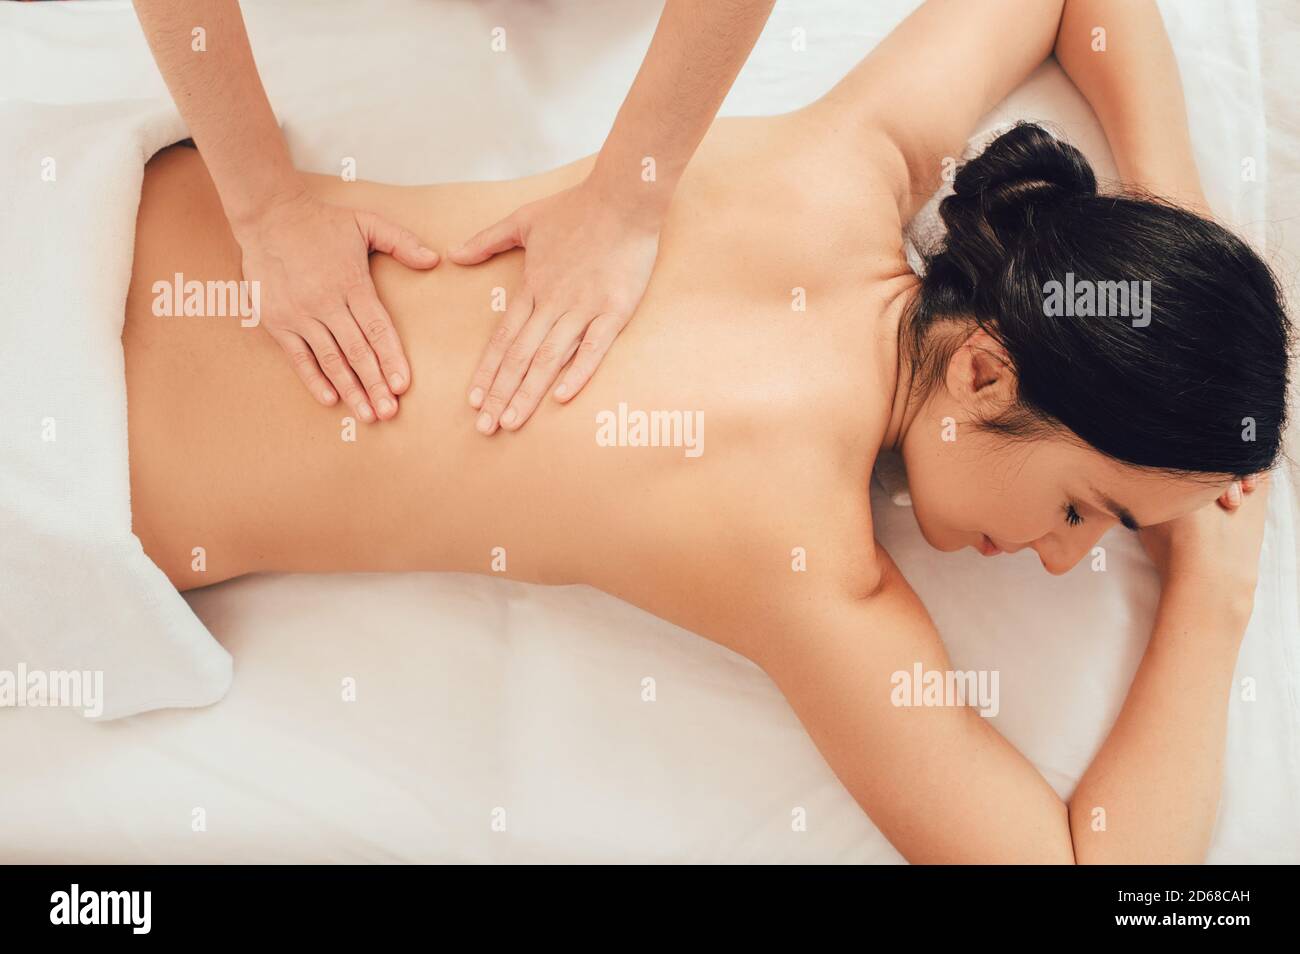 Top view of woman lying on a massage table and receive back massage, spa weekend. Antri-stress massage Stock Photo